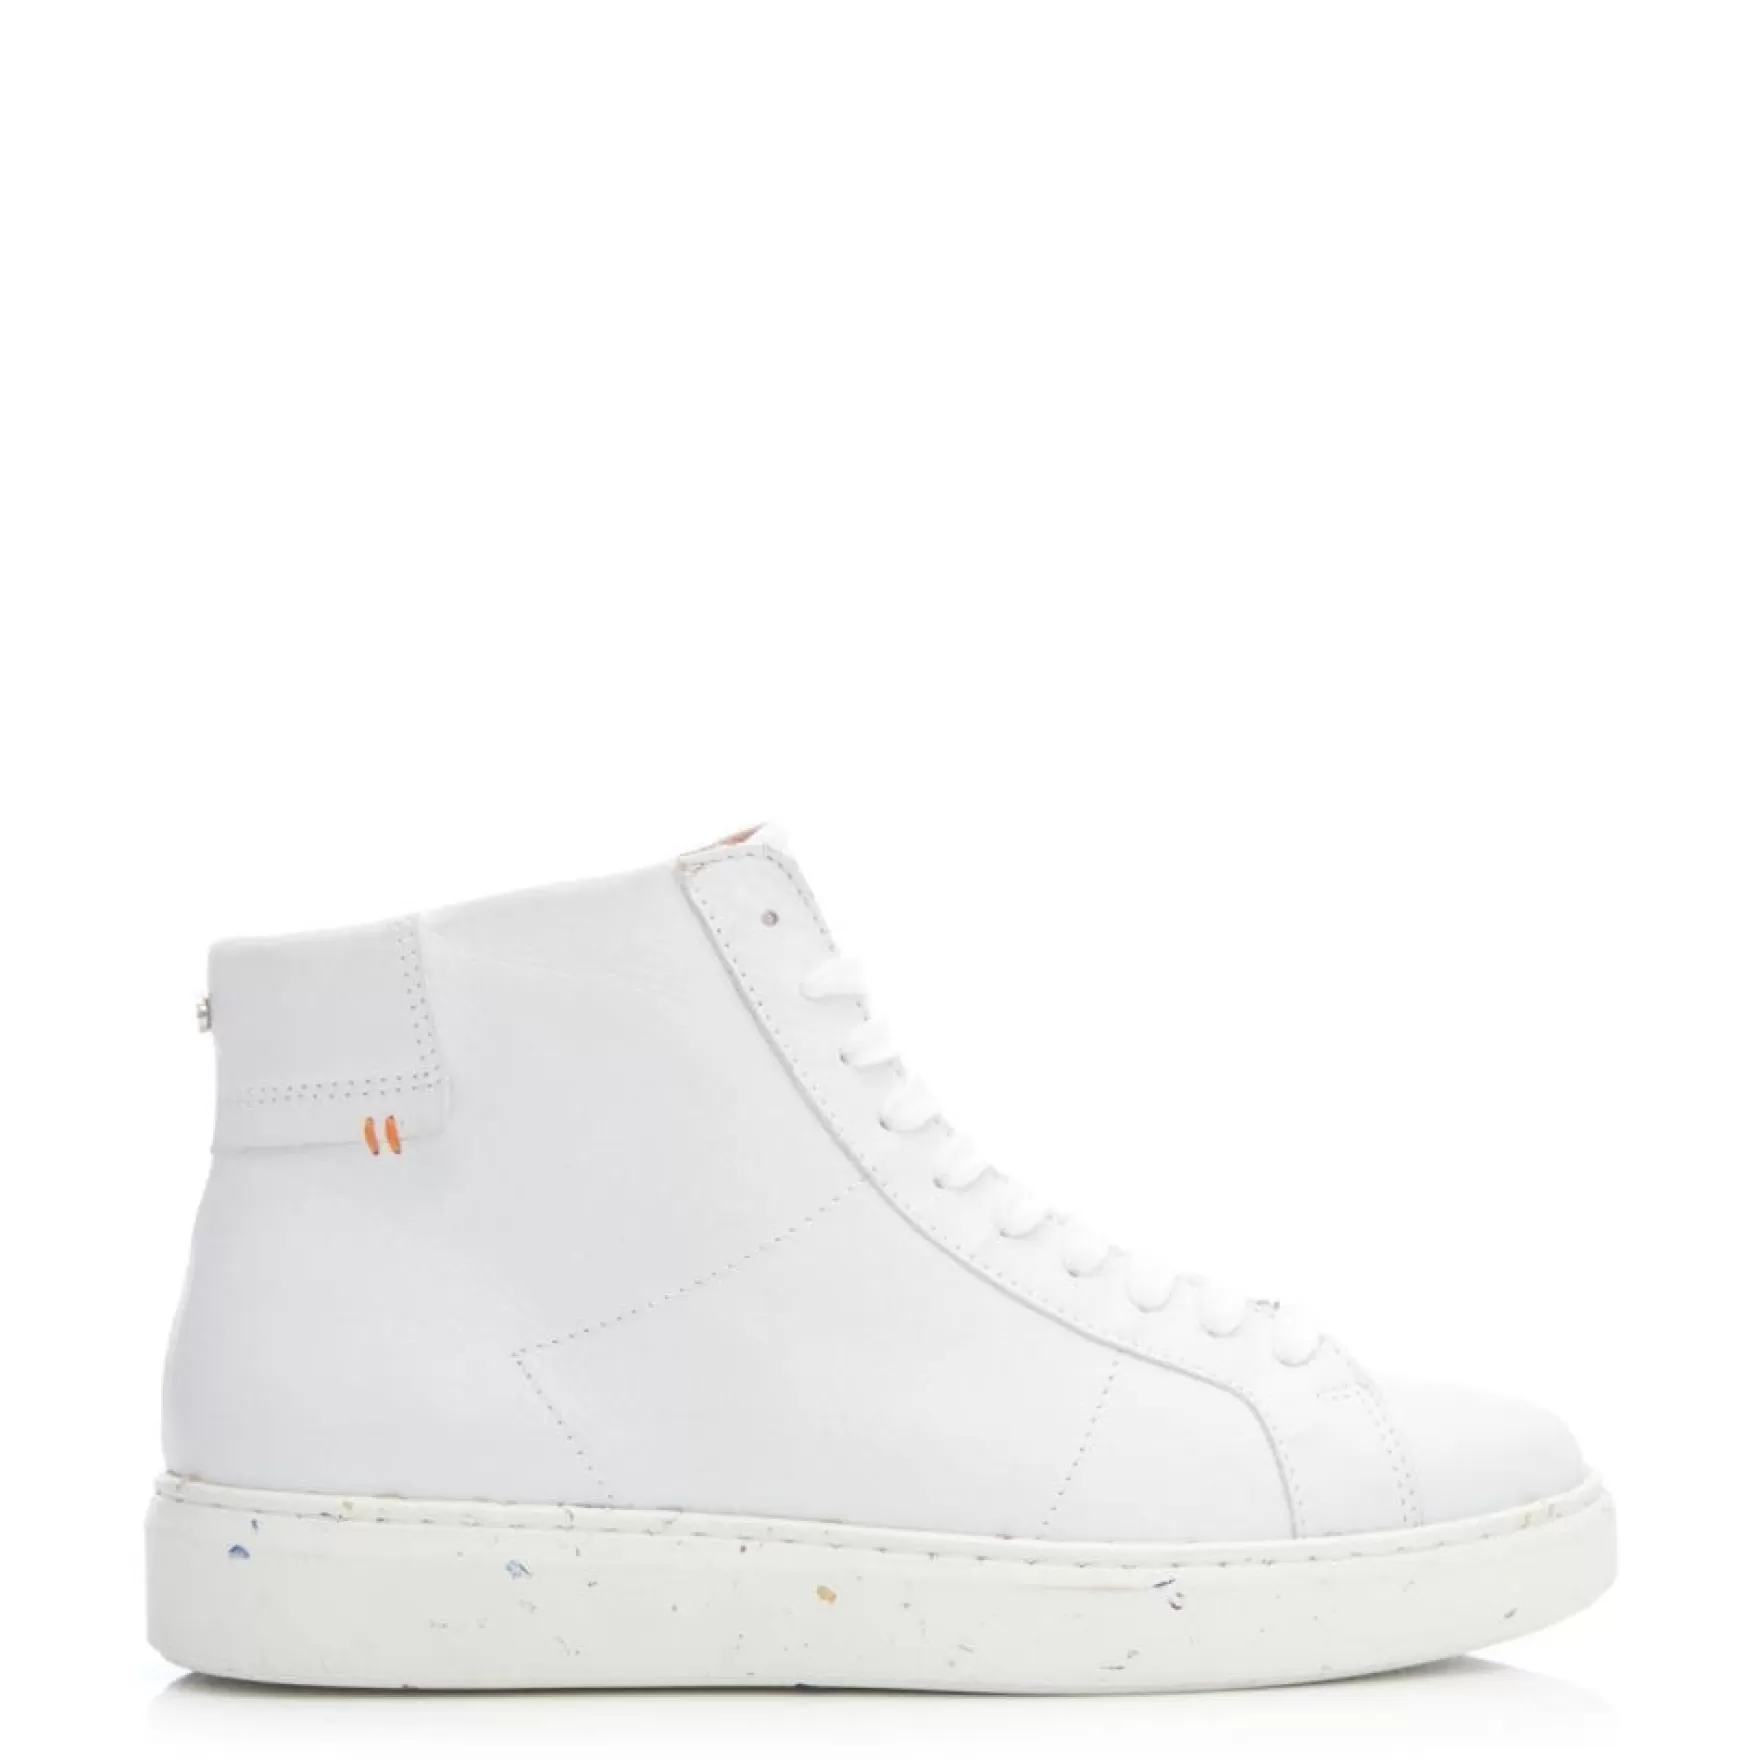 Sustainable Range | White Trainers | High-Top Trainers*Moda in Pelle Sustainable Range | White Trainers | High-Top Trainers